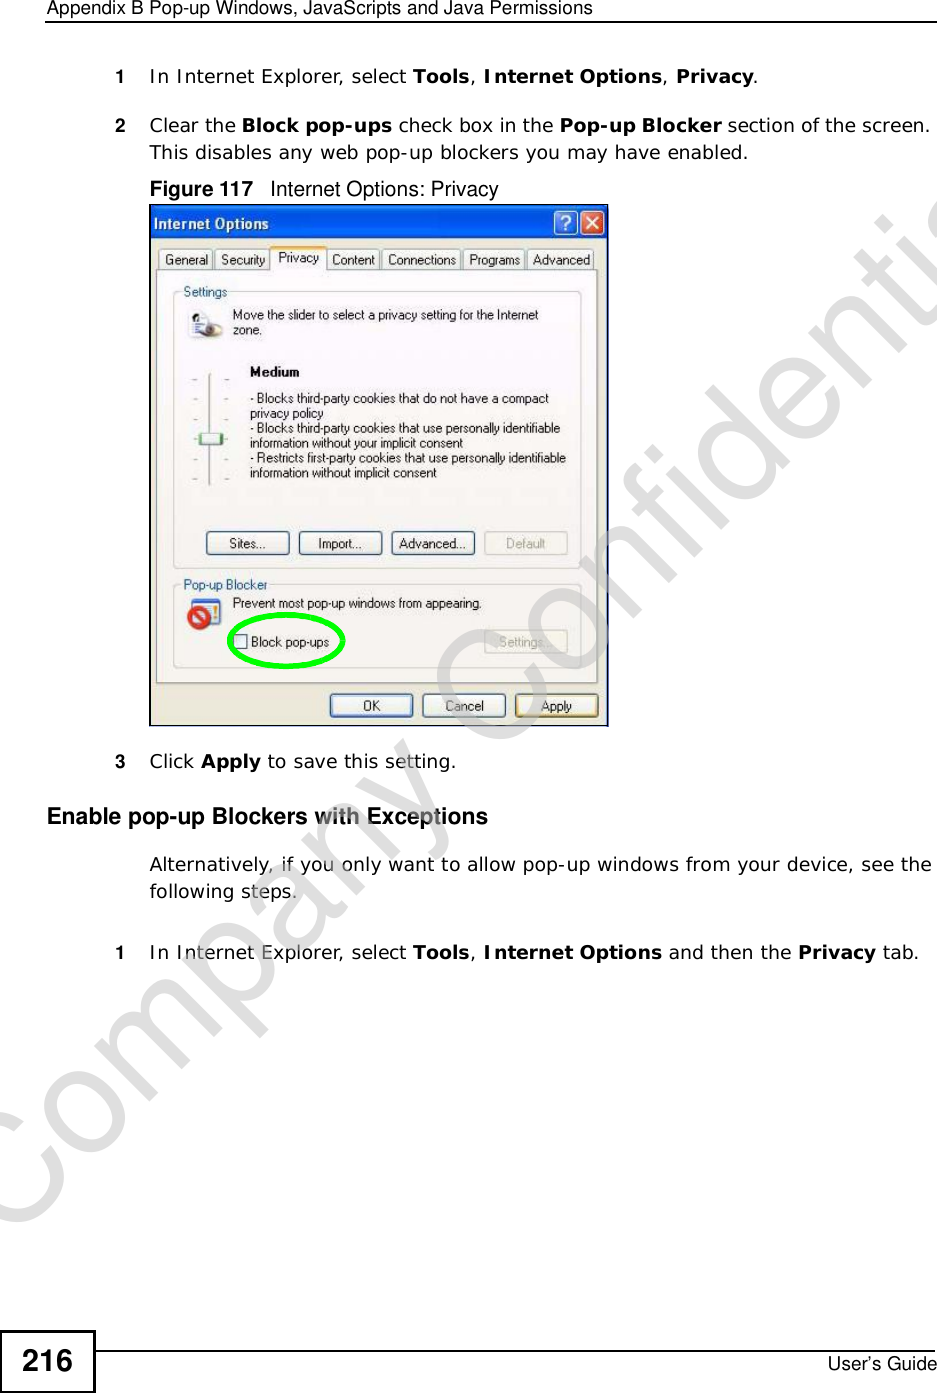 Appendix BPop-up Windows, JavaScripts and Java PermissionsUser’s Guide2161In Internet Explorer, select Tools,Internet Options,Privacy.2Clear the Block pop-ups check box in the Pop-up Blocker section of the screen. This disables any web pop-up blockers you may have enabled. Figure 117   Internet Options: Privacy3Click Apply to save this setting.Enable pop-up Blockers with ExceptionsAlternatively, if you only want to allow pop-up windows from your device, see the following steps.1In Internet Explorer, select Tools,Internet Options and then the Privacy tab. Company Confidential